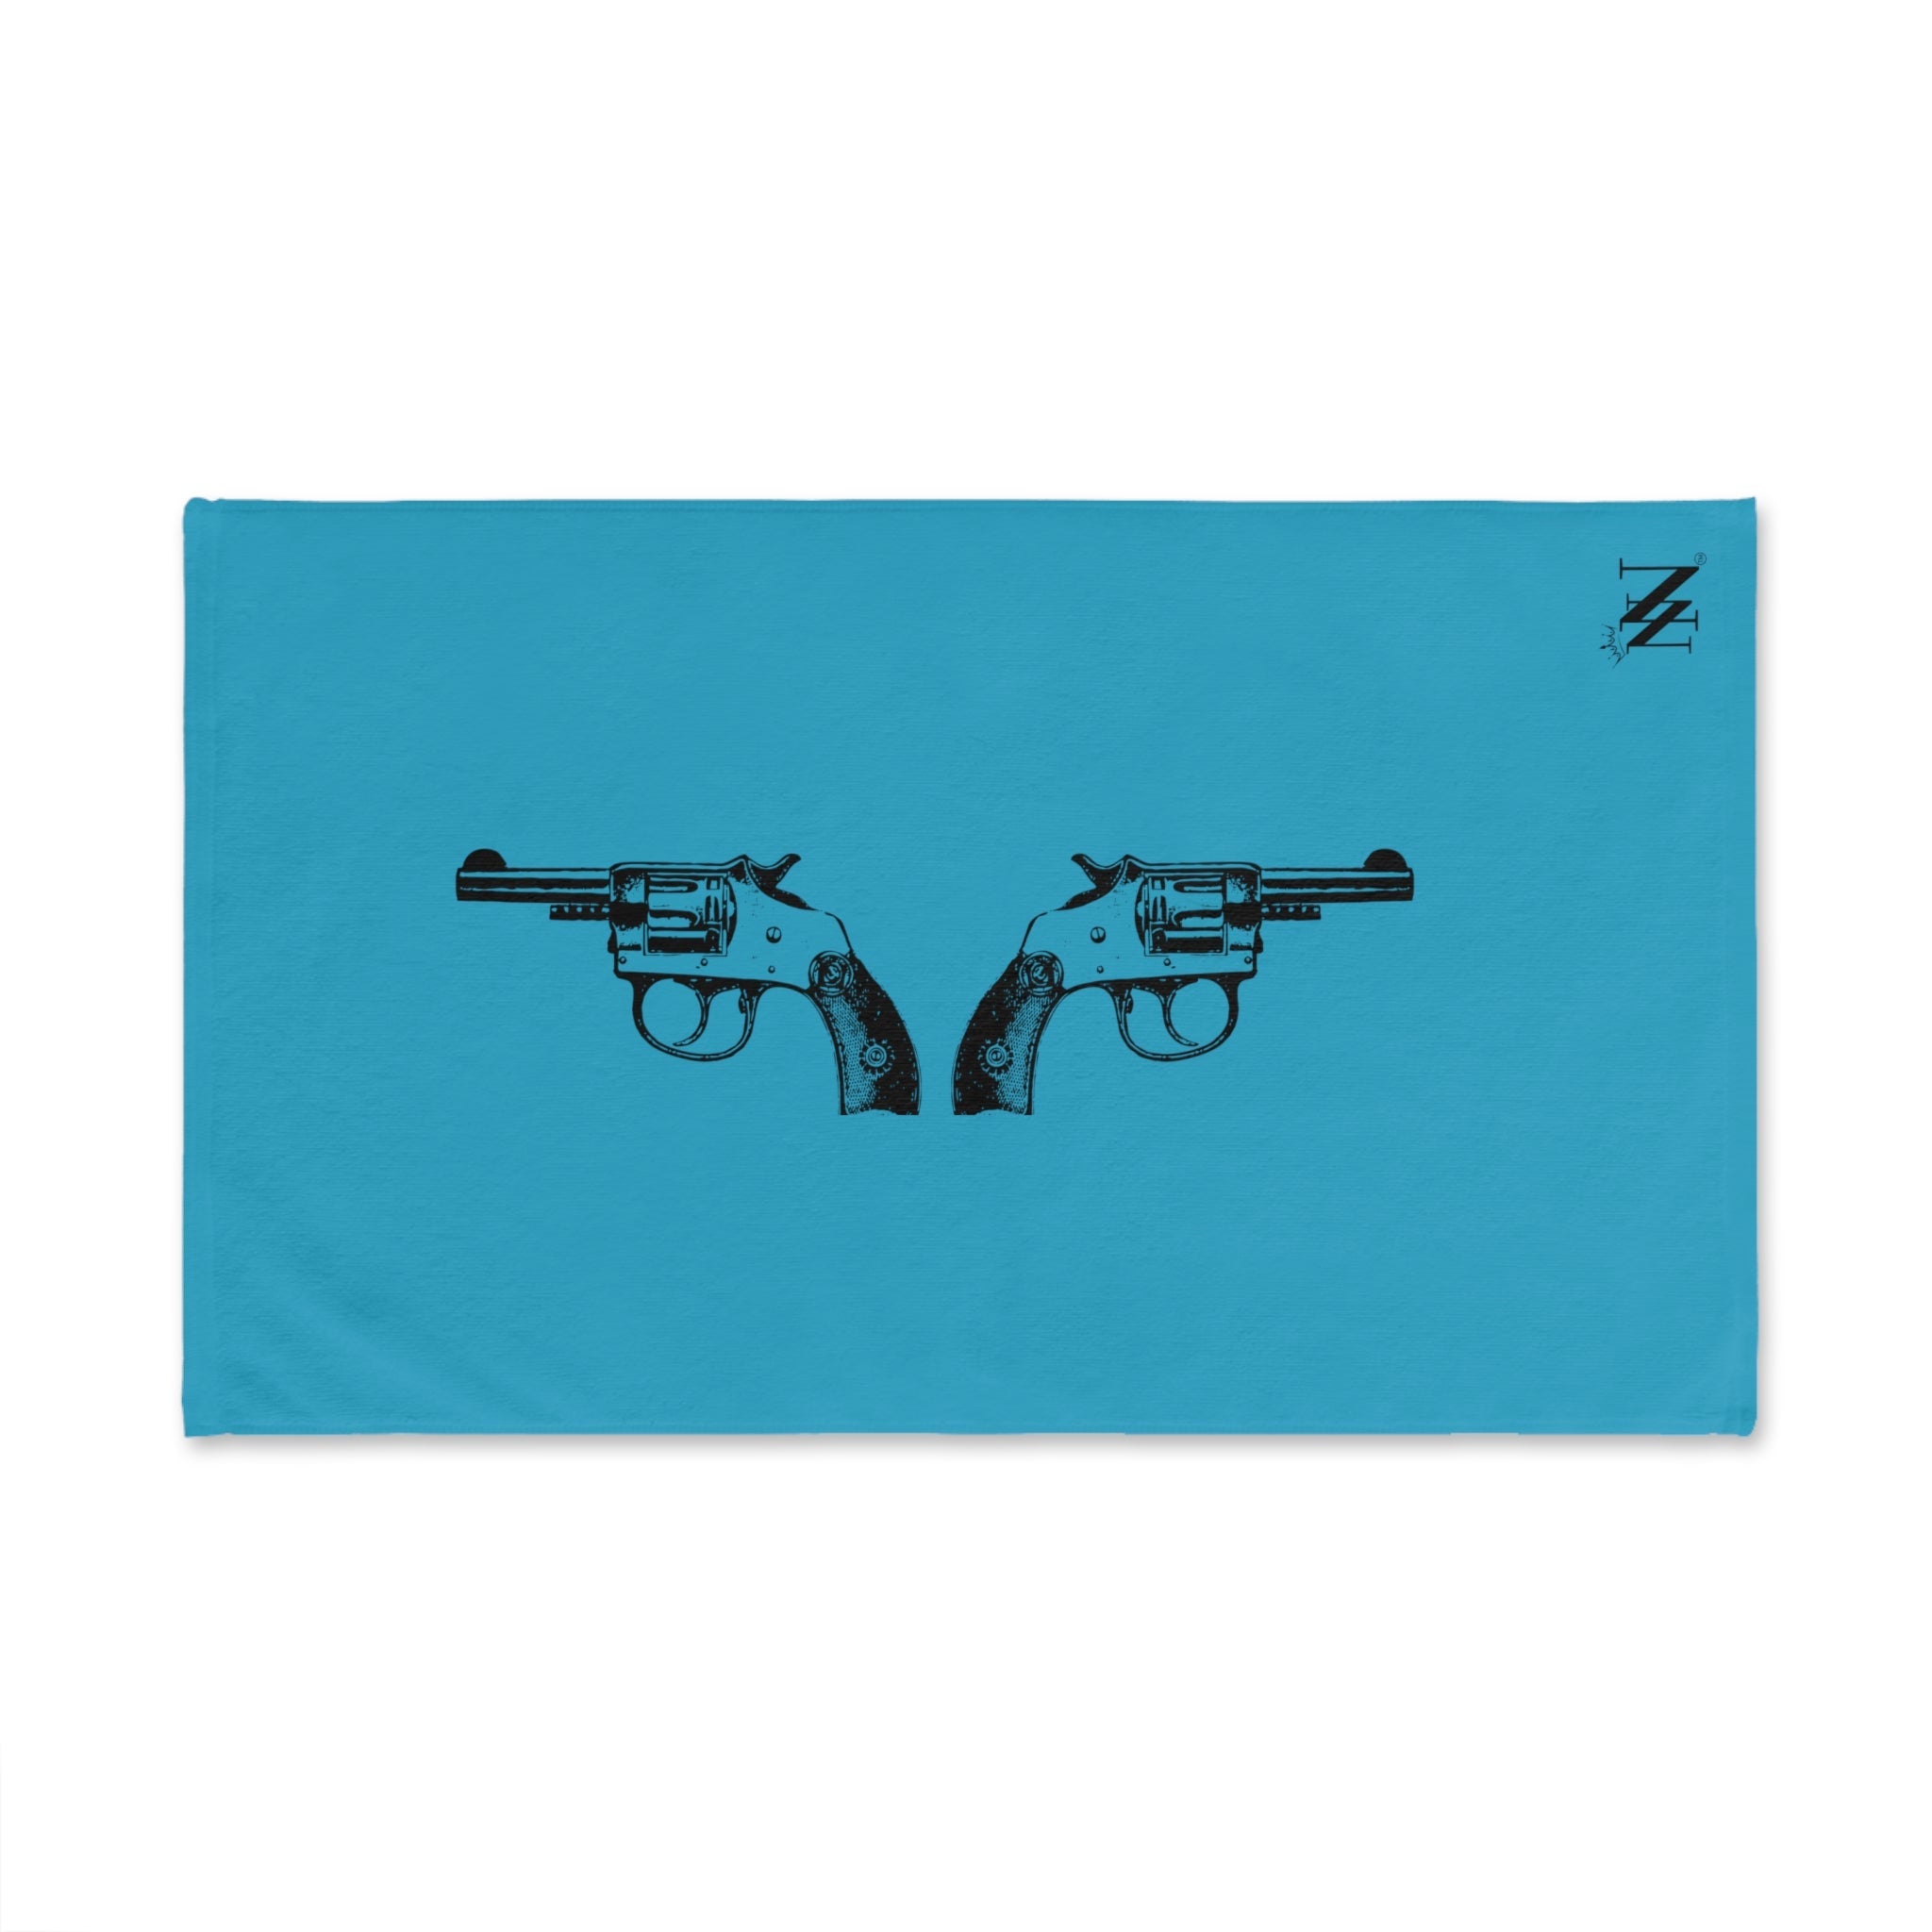 Black Revolver Gun Show Teal | Novelty Gifts for Boyfriend, Funny Towel Romantic Gift for Wedding Couple Fiance First Year Anniversary Valentines, Party Gag Gifts, Joke Humor Cloth for Husband Men BF NECTAR NAPKINS